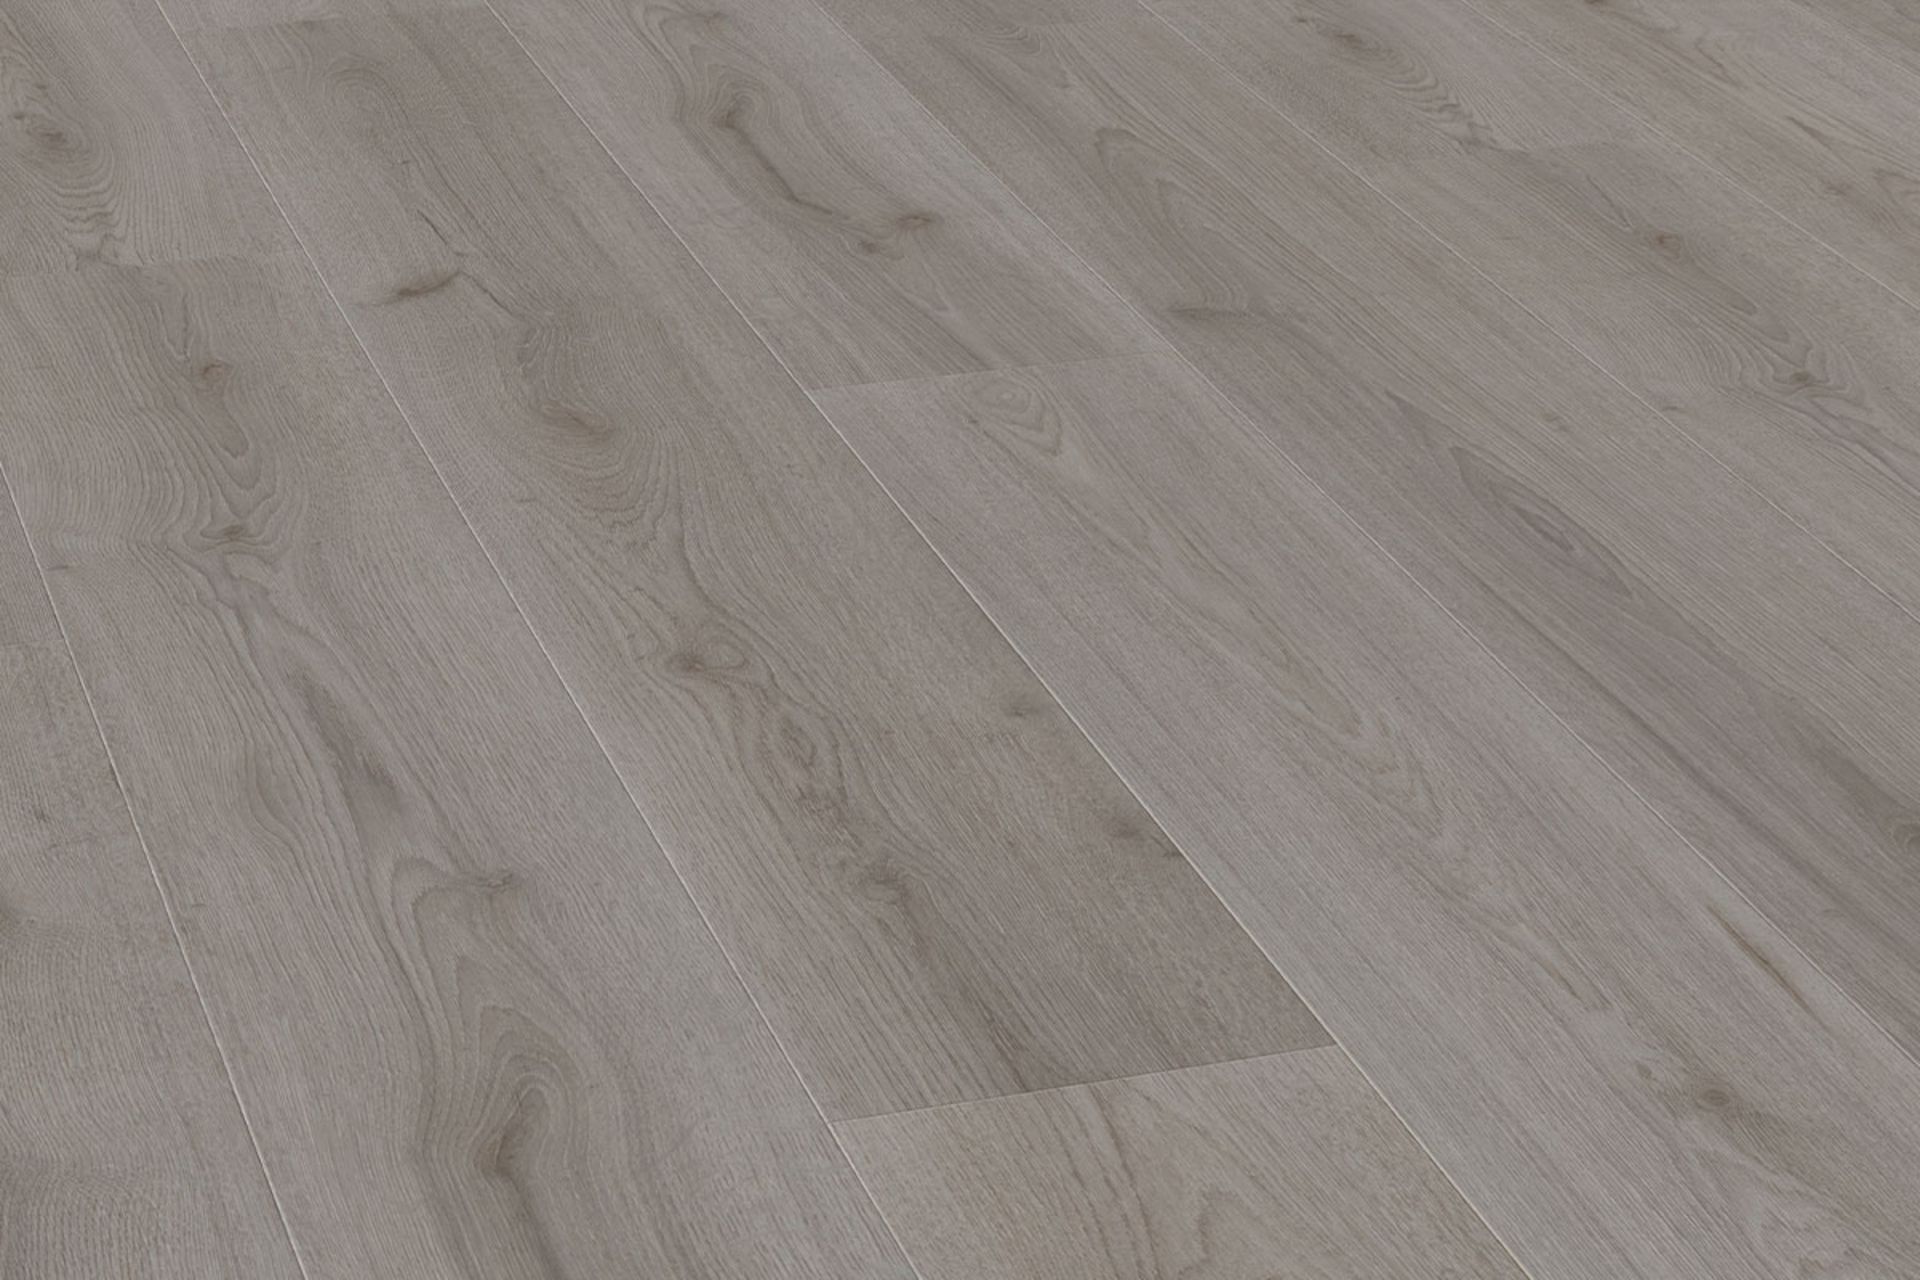 9.58m2 LAMINATE FLOORING WILD DOVE OAK. The elegant mid-grey hue of this floor complements any ... - Image 2 of 2